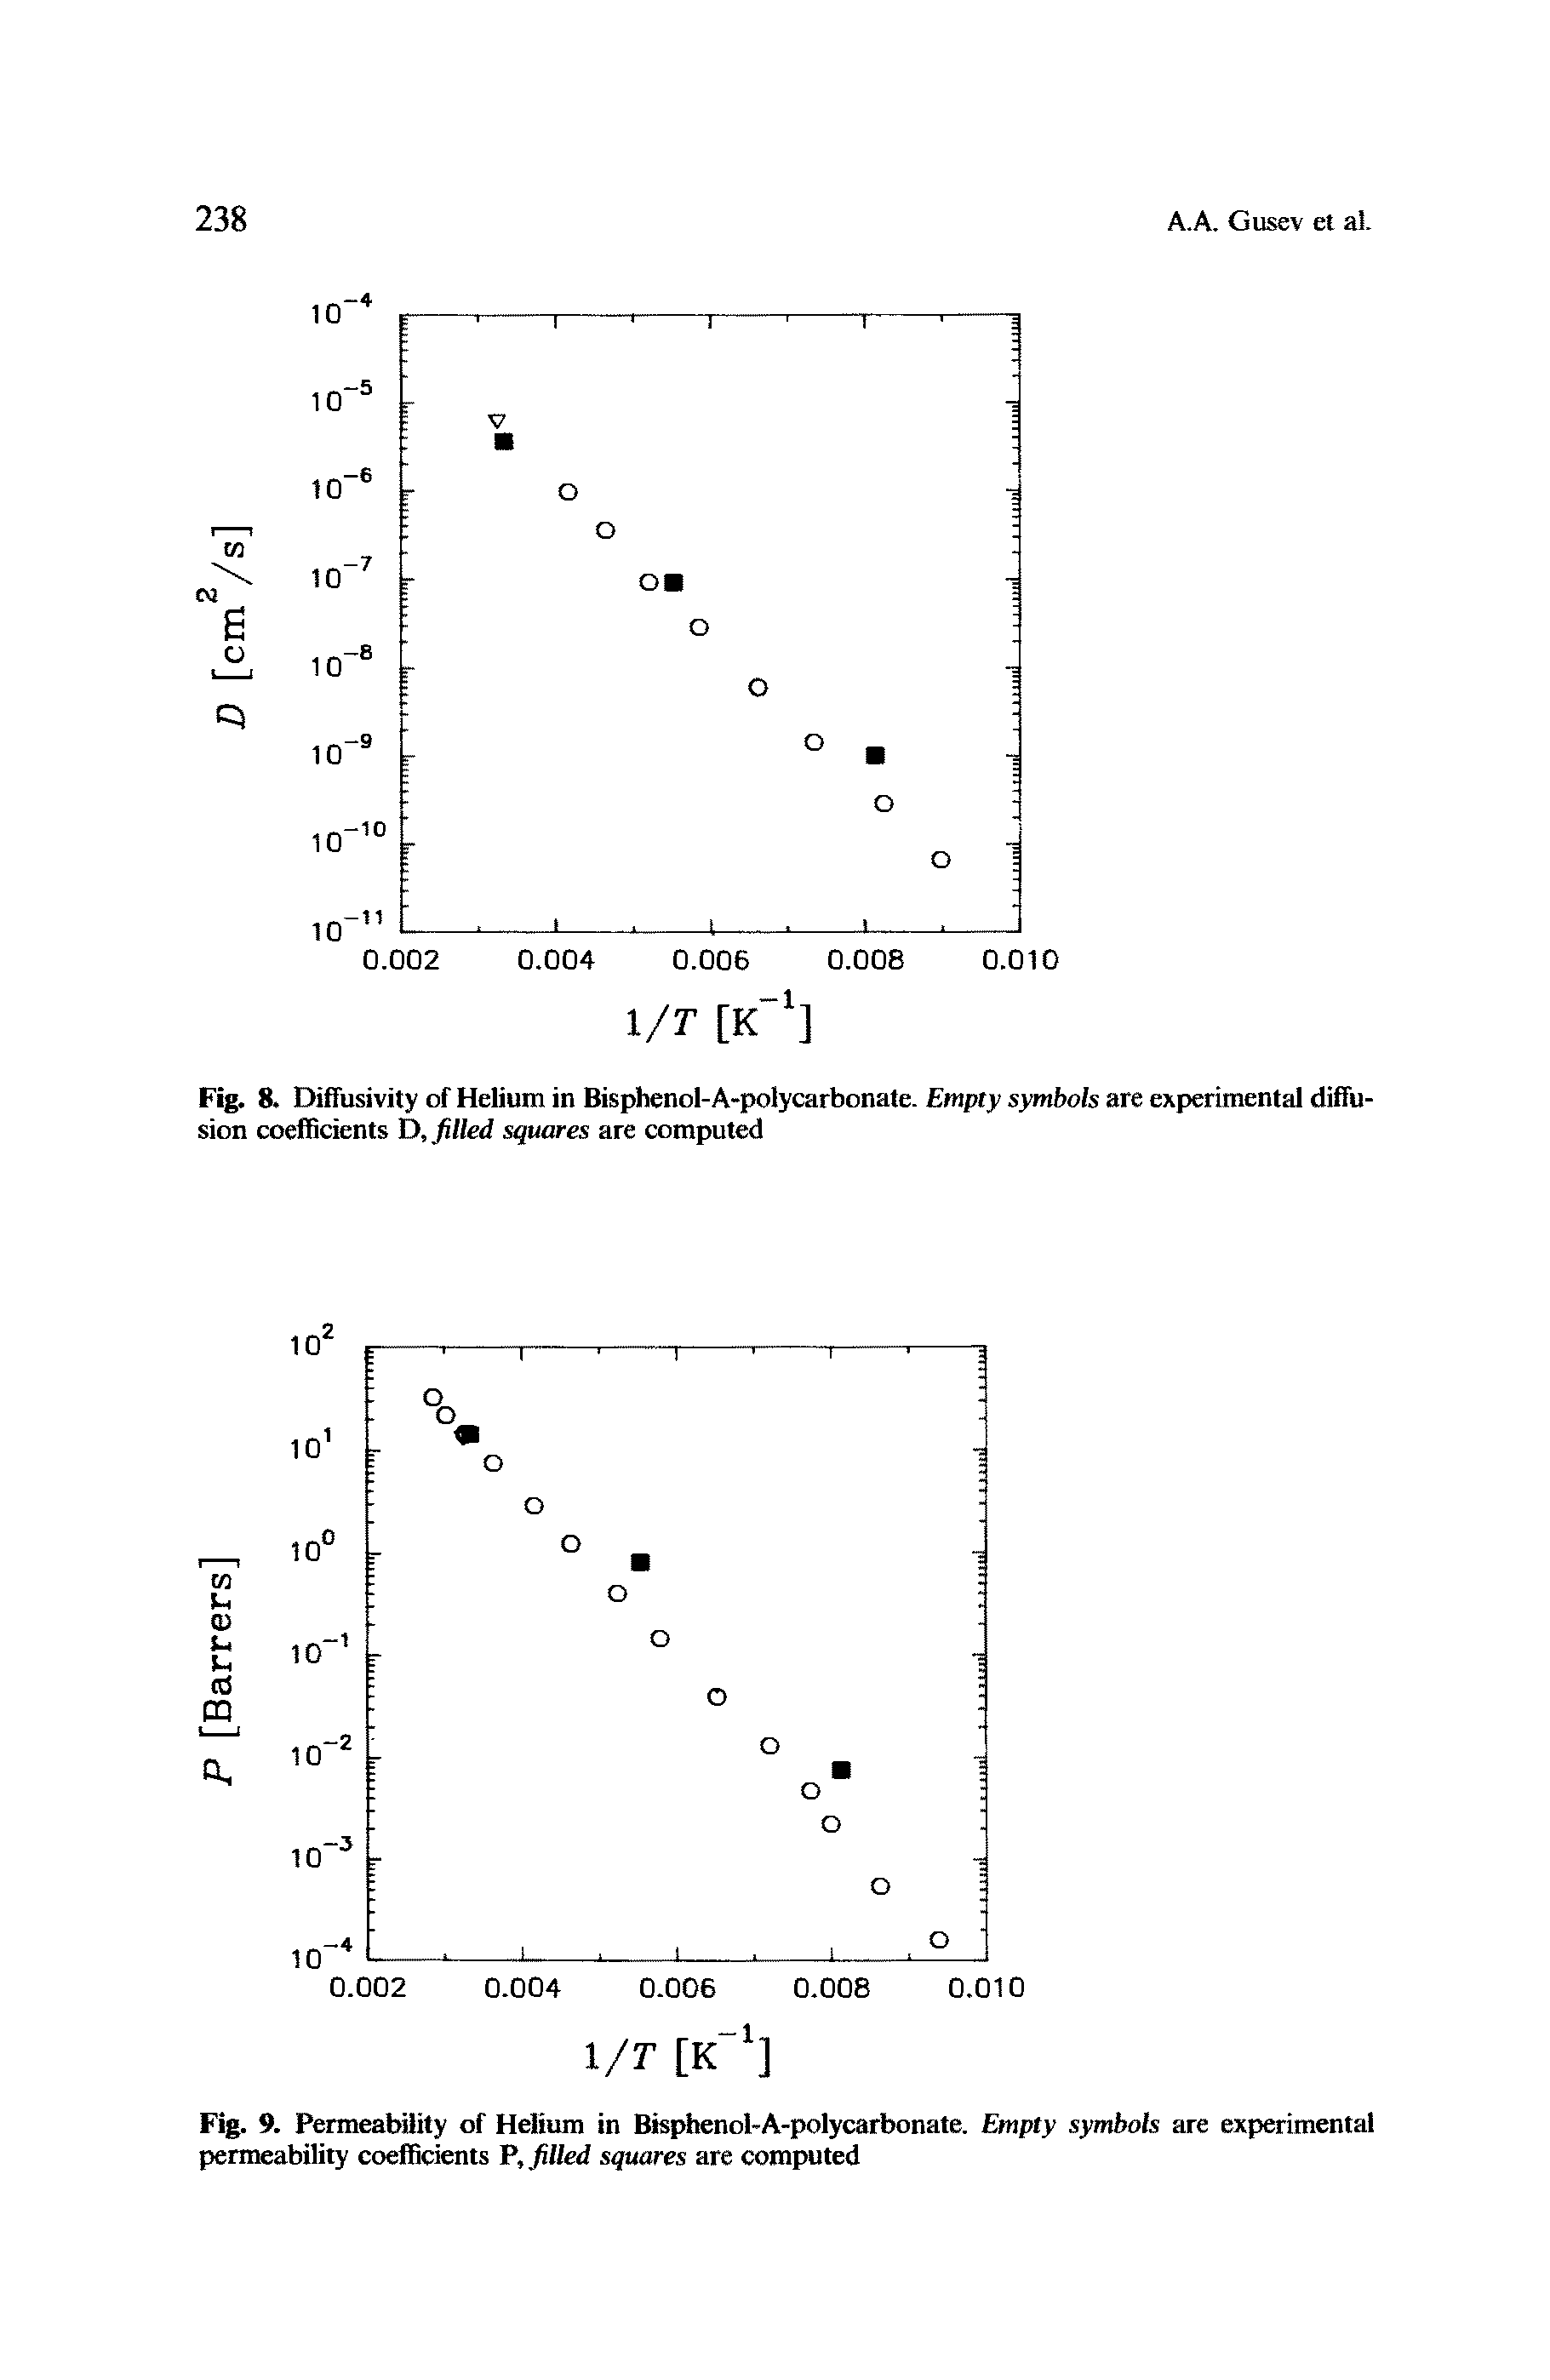 Fig. 9. Permeability of Helium in Bisphenol-A-polycarbonate. Empty symbols are experimental permeability coefficients P, filled squares are computed...